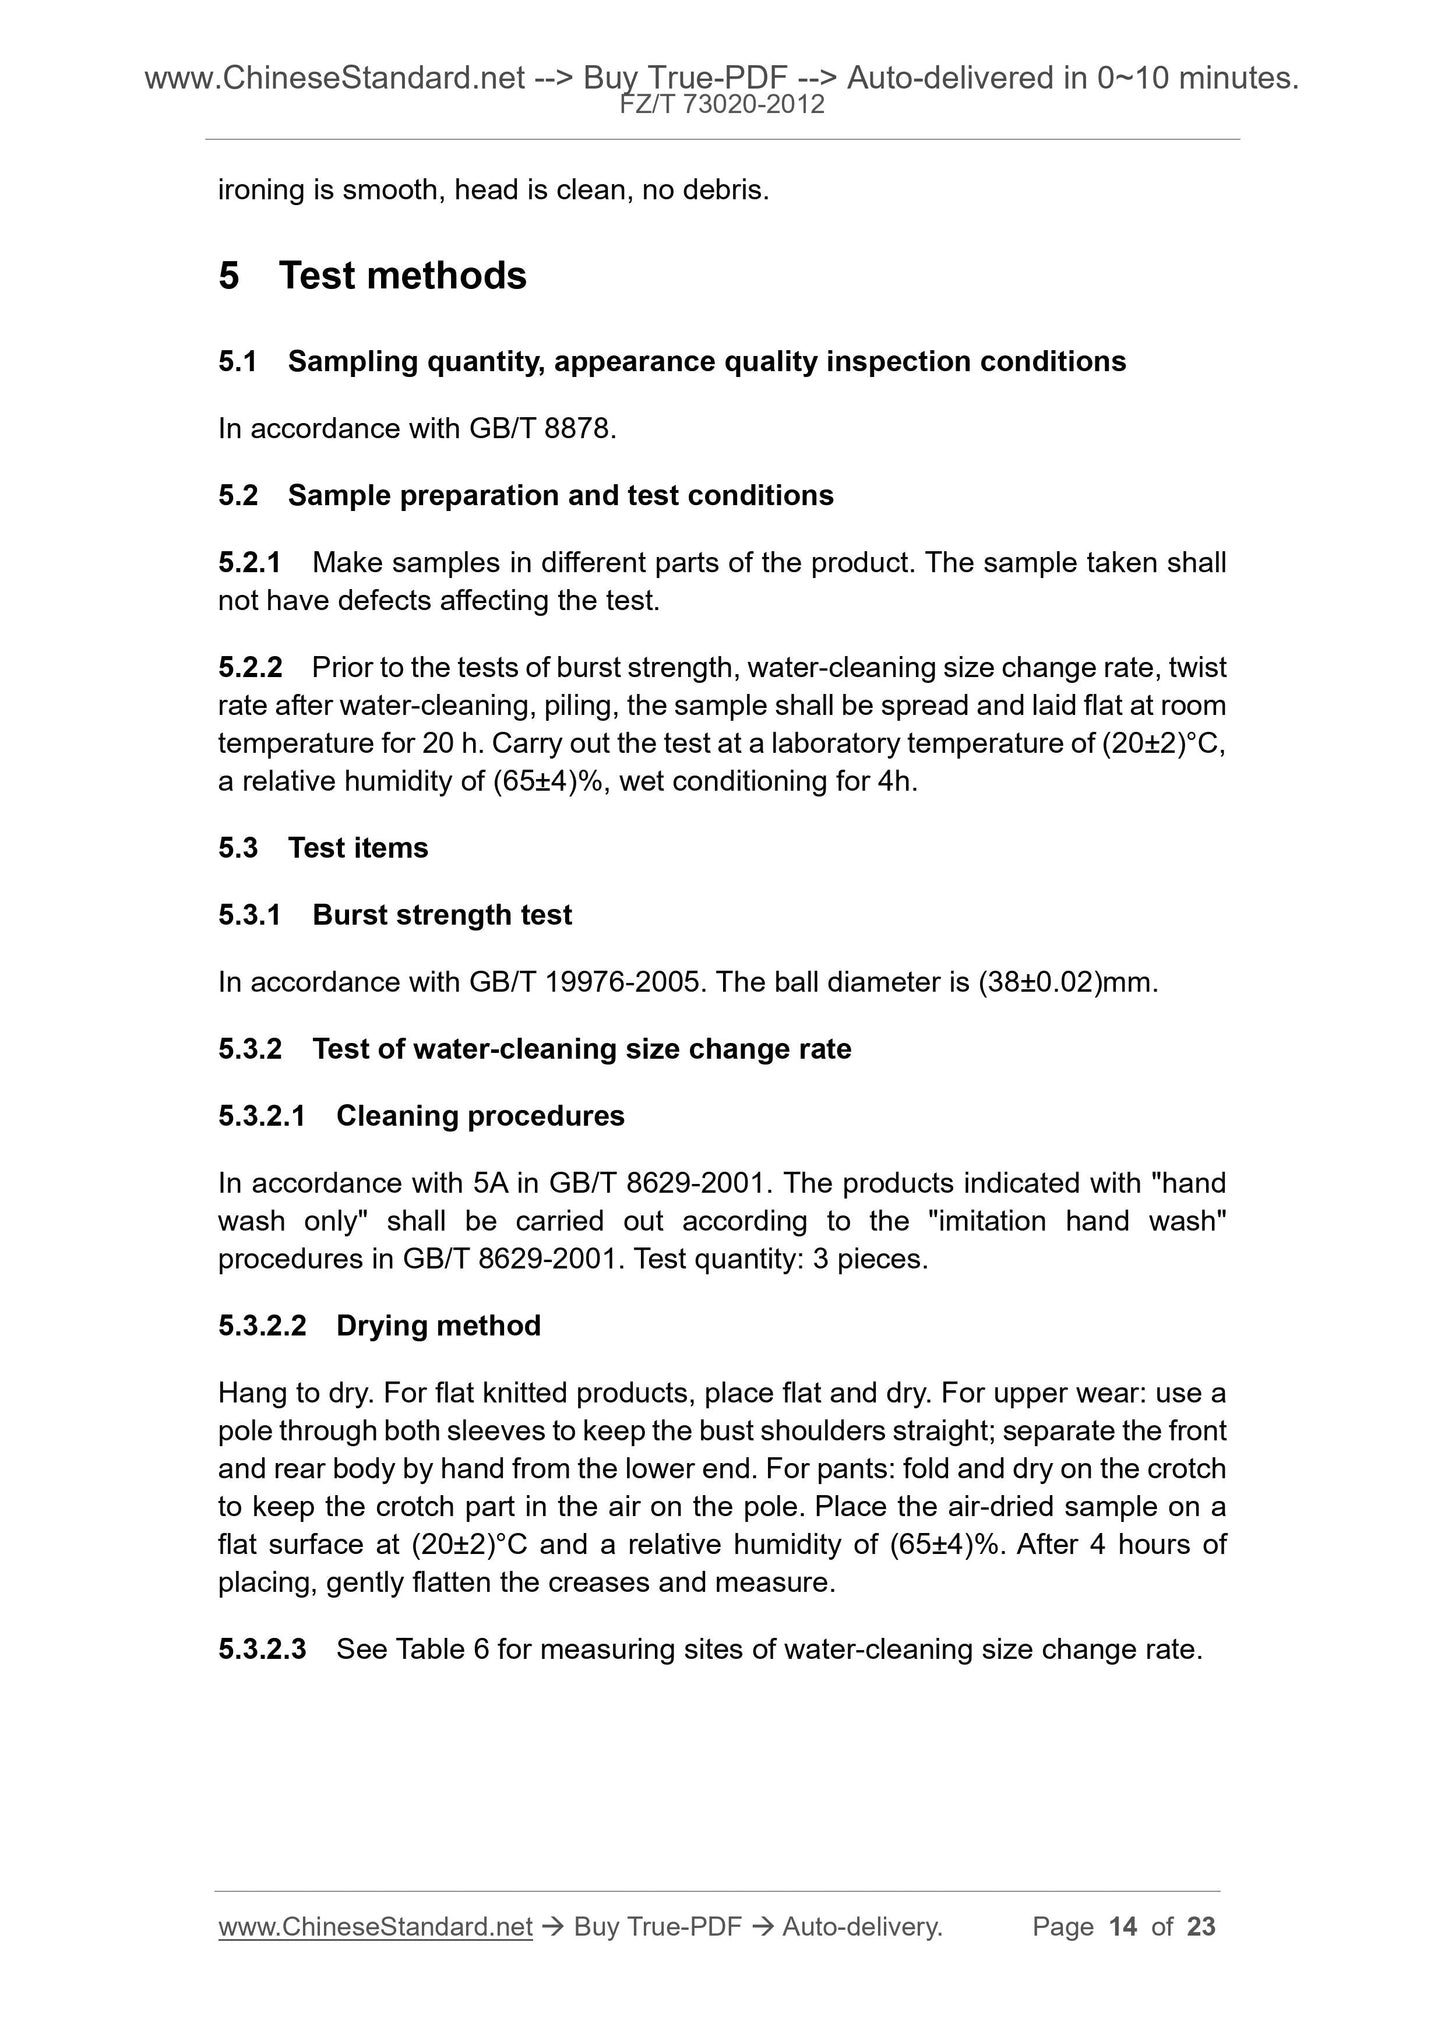 FZ/T 73020-2012 Page 6